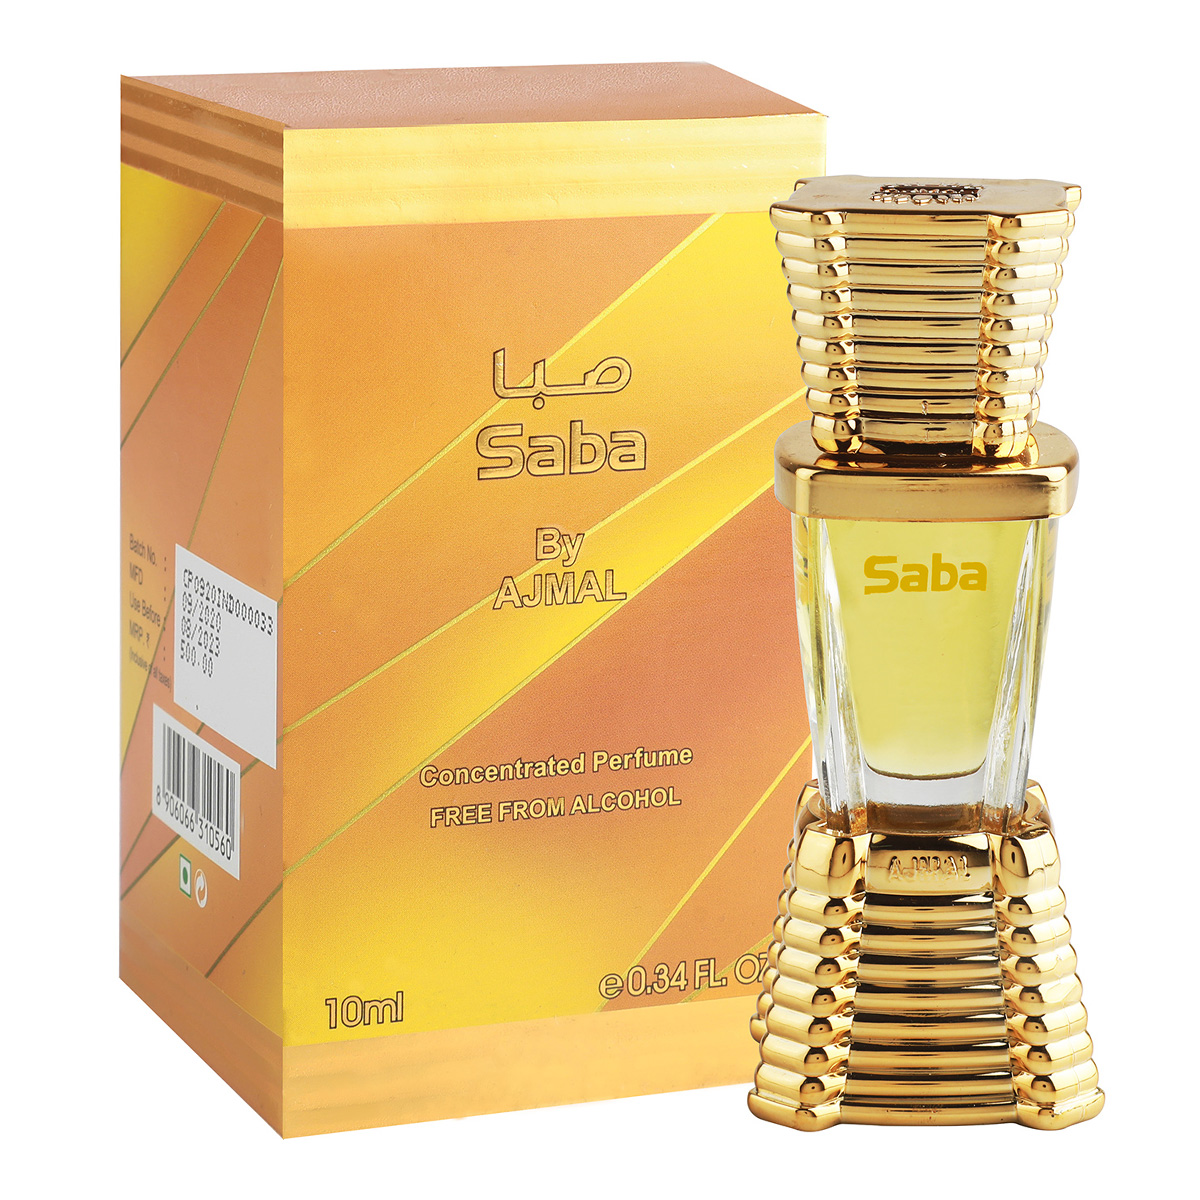 Ajmal Saba Concentrated Perfume Free From Alcohol, 10ml